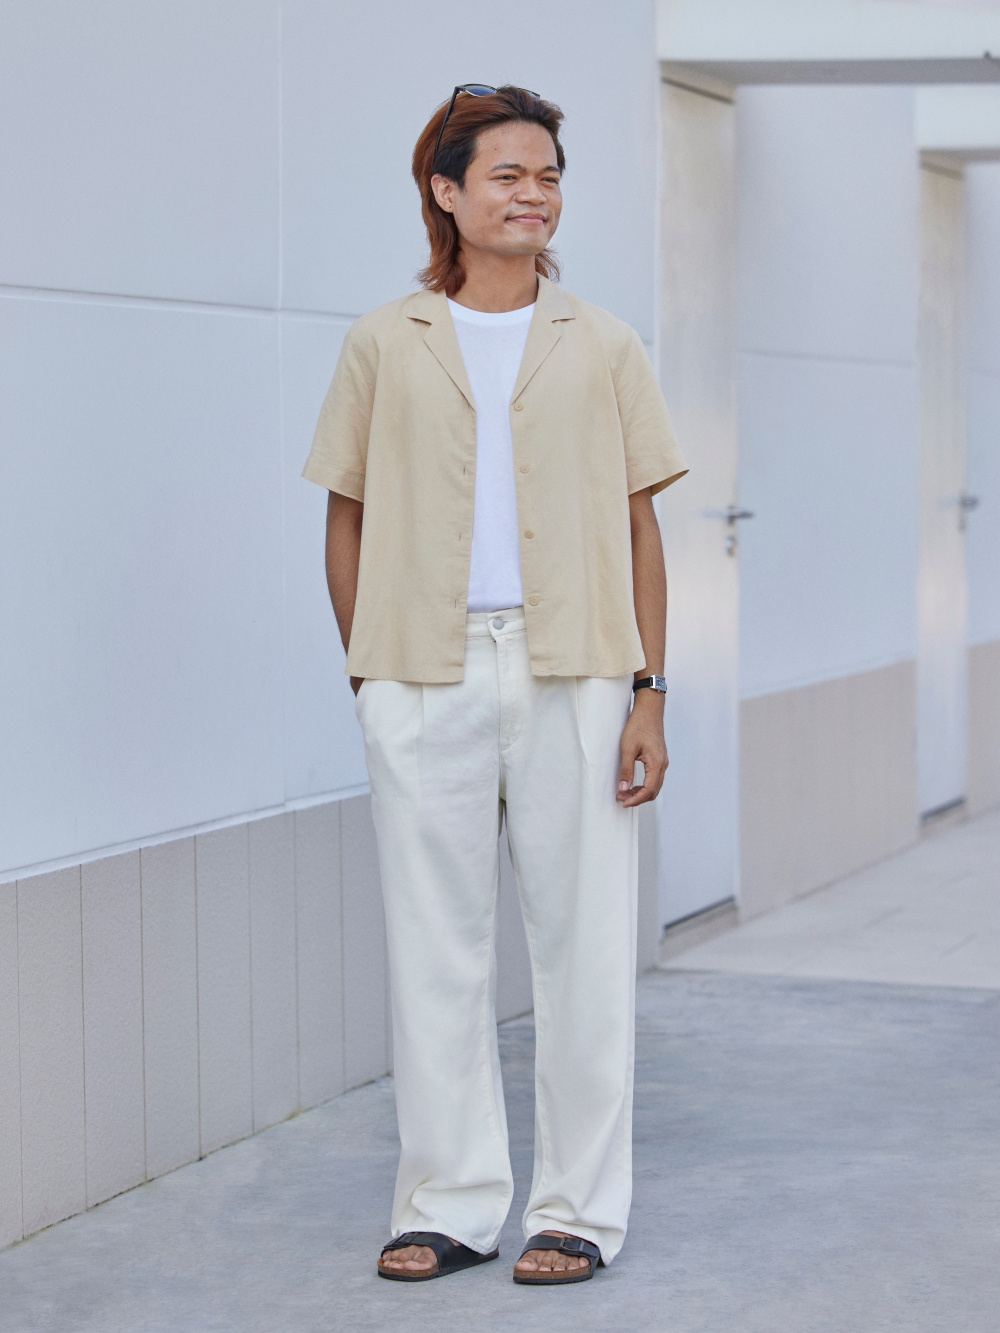 Check styling ideas for「SUPIMA Cotton Crew Neck Short Sleeve T-Shirt、Cotton  Linen Stand Collar Striped Short Sleeve Shirt」